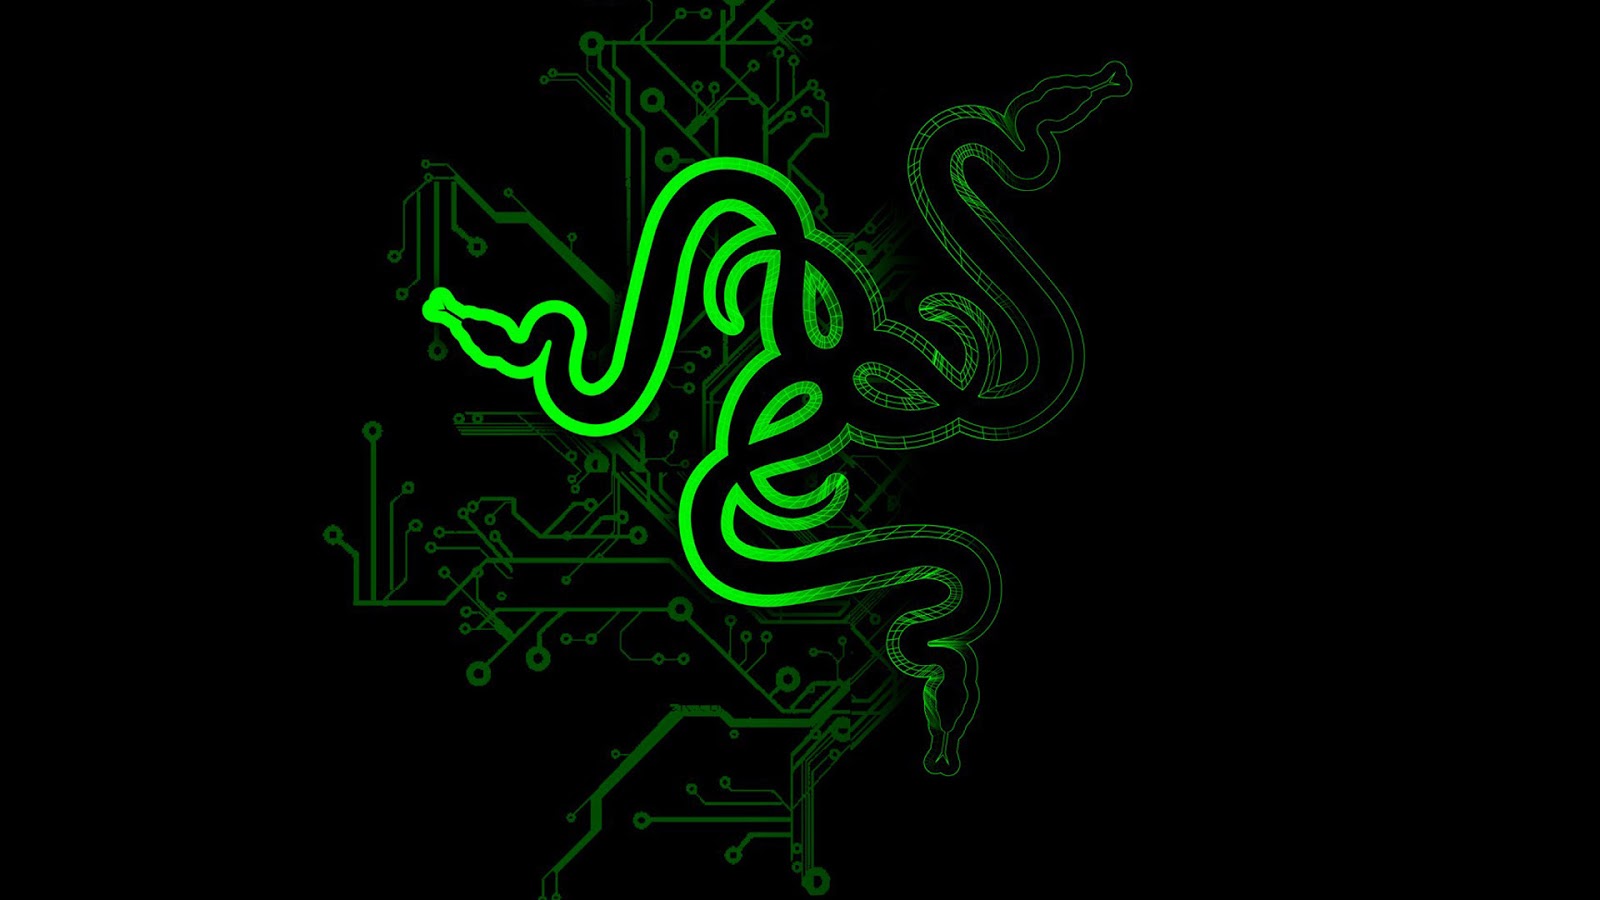 Razer Blade HD wallpapers | HD Wallpapers (High Definition ...